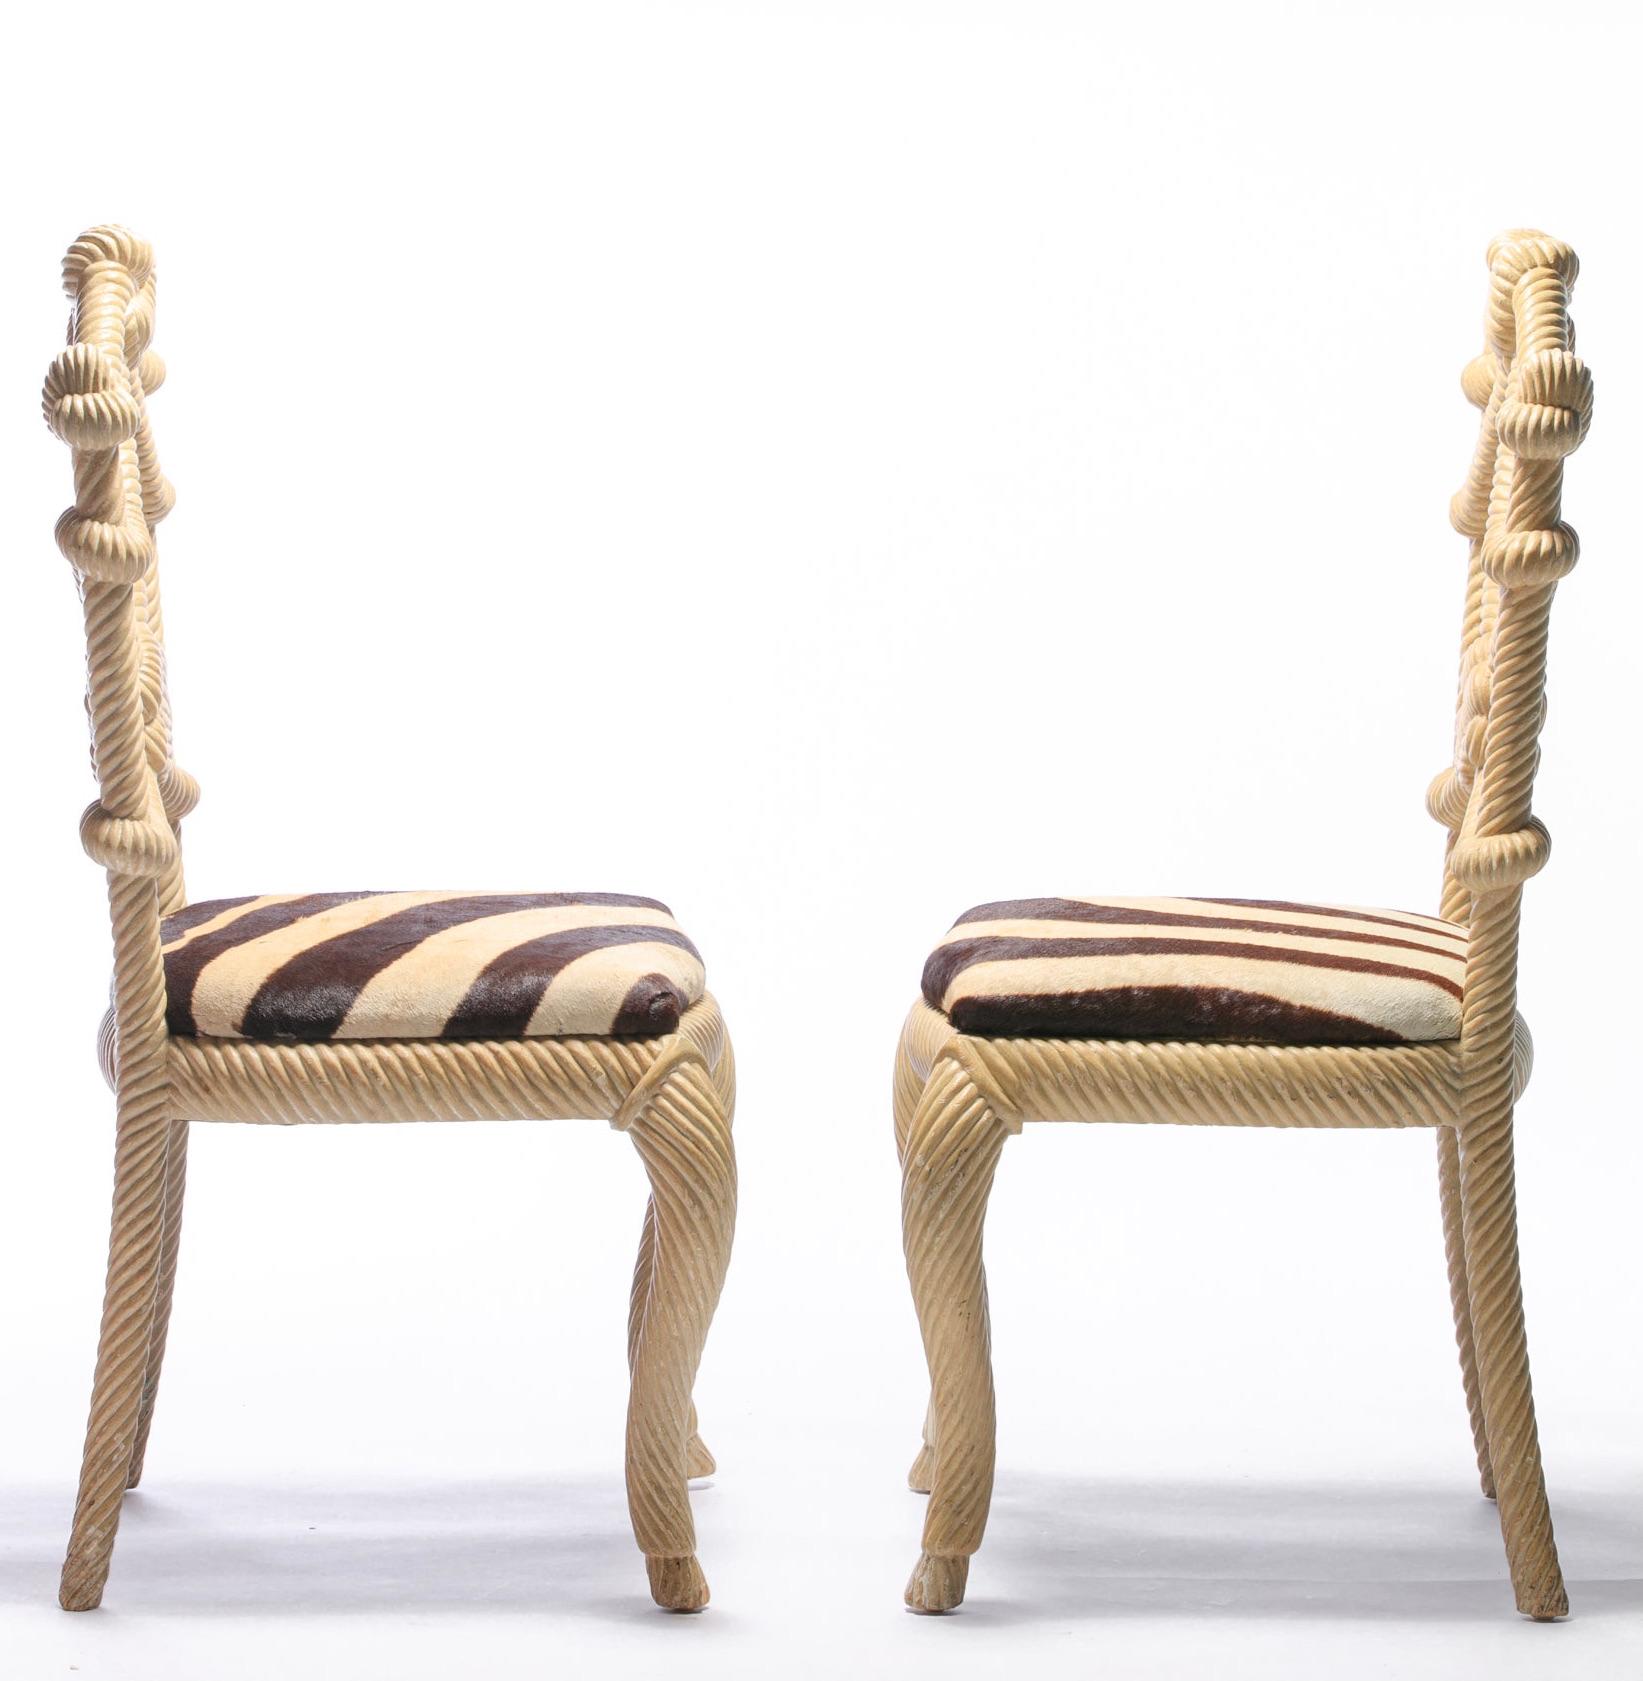 Hollywood Regency Pair of Rope Chairs from Viceroy Miami with Zebra Hide Upholstered Seats For Sale